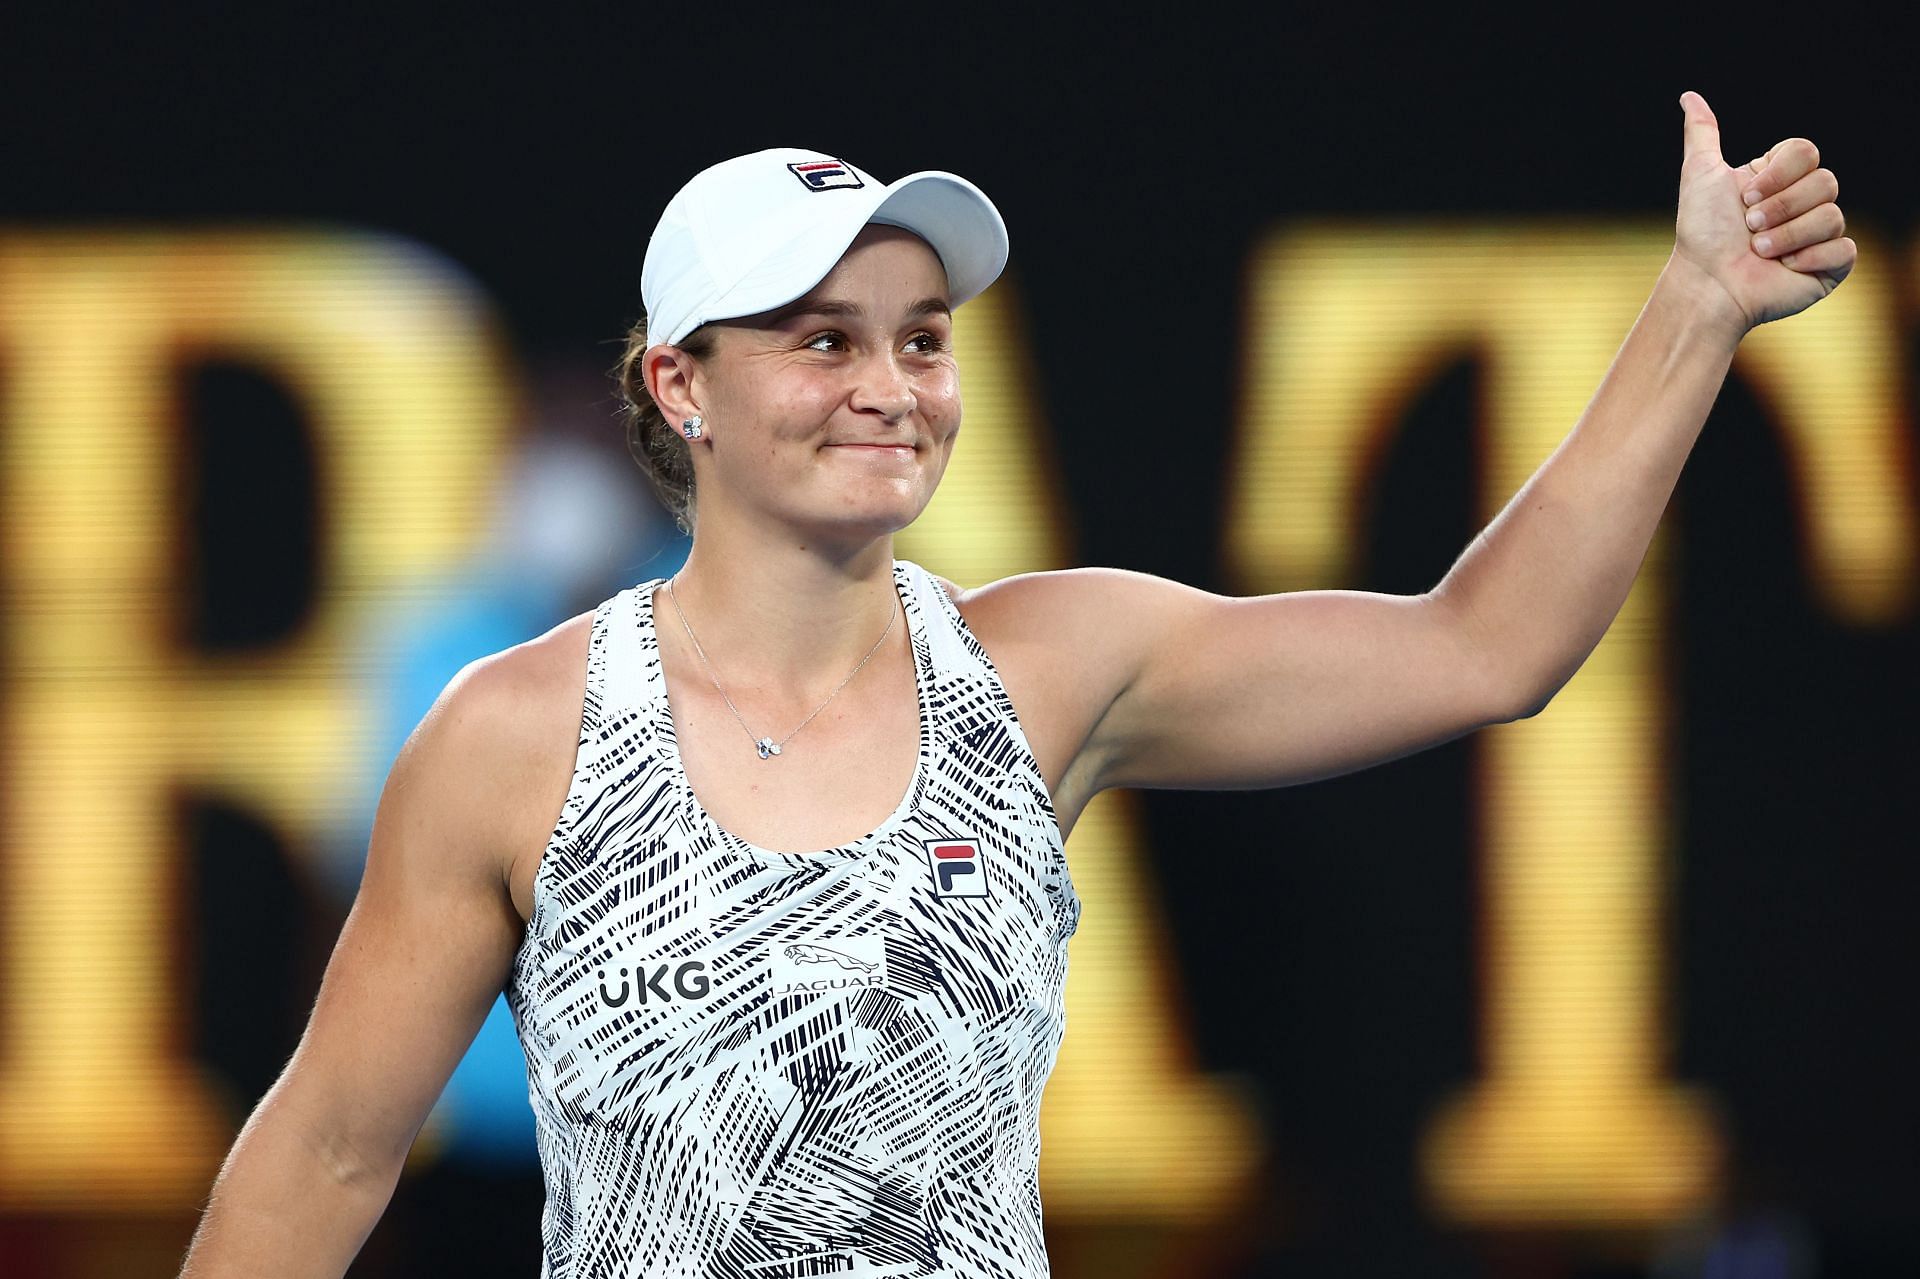 Ashleigh Barty acknowledges the crowd after her quarterfinal win at 2022 Australian Open.